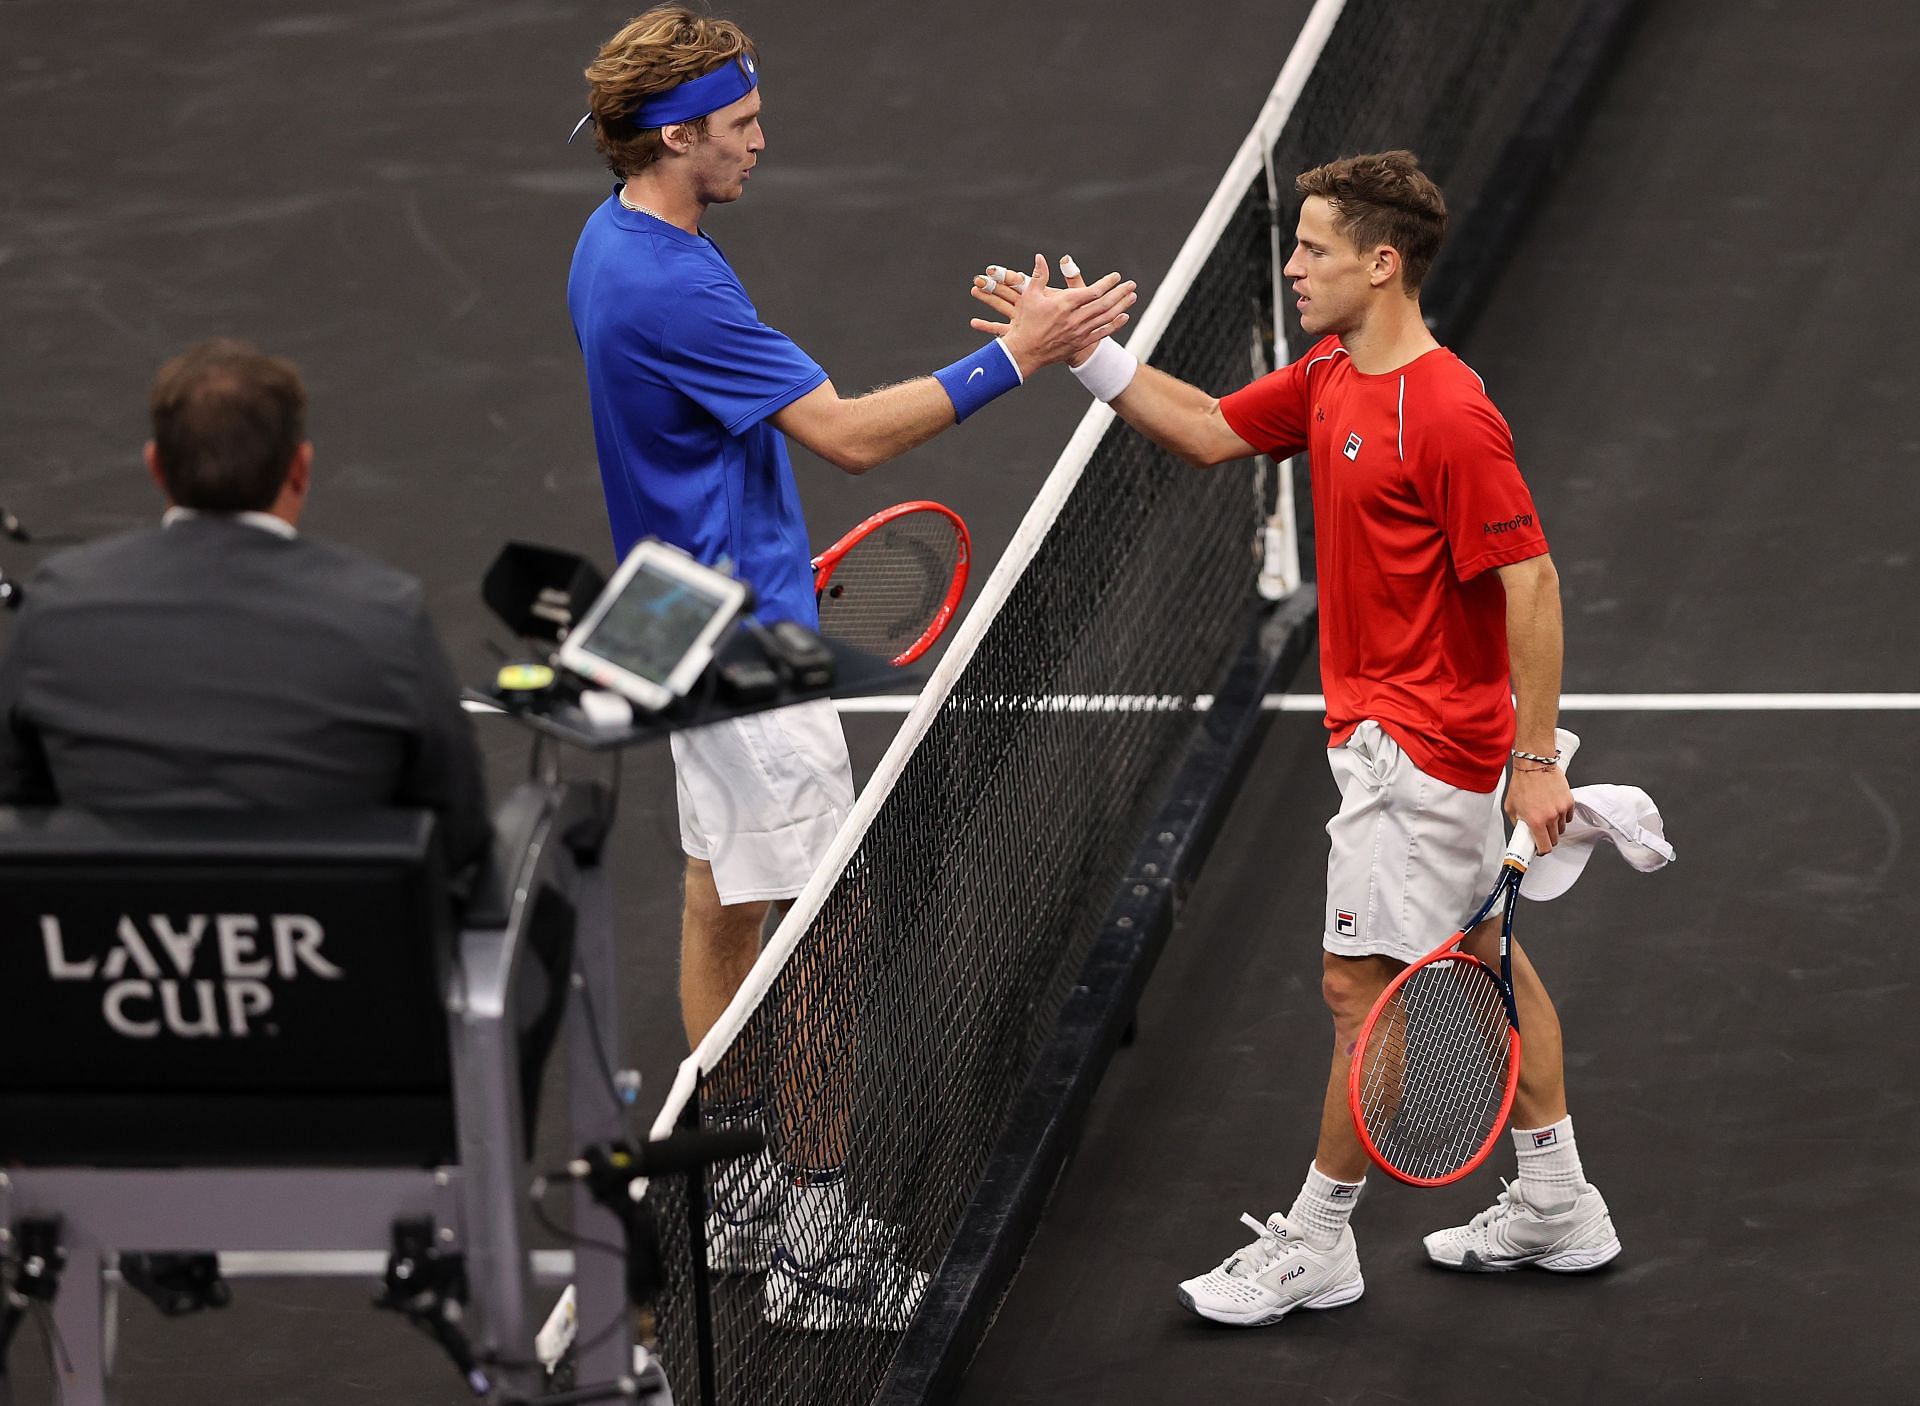 Andrey Rublev and Diego Schwartzman at the 2021 Laver Cup.